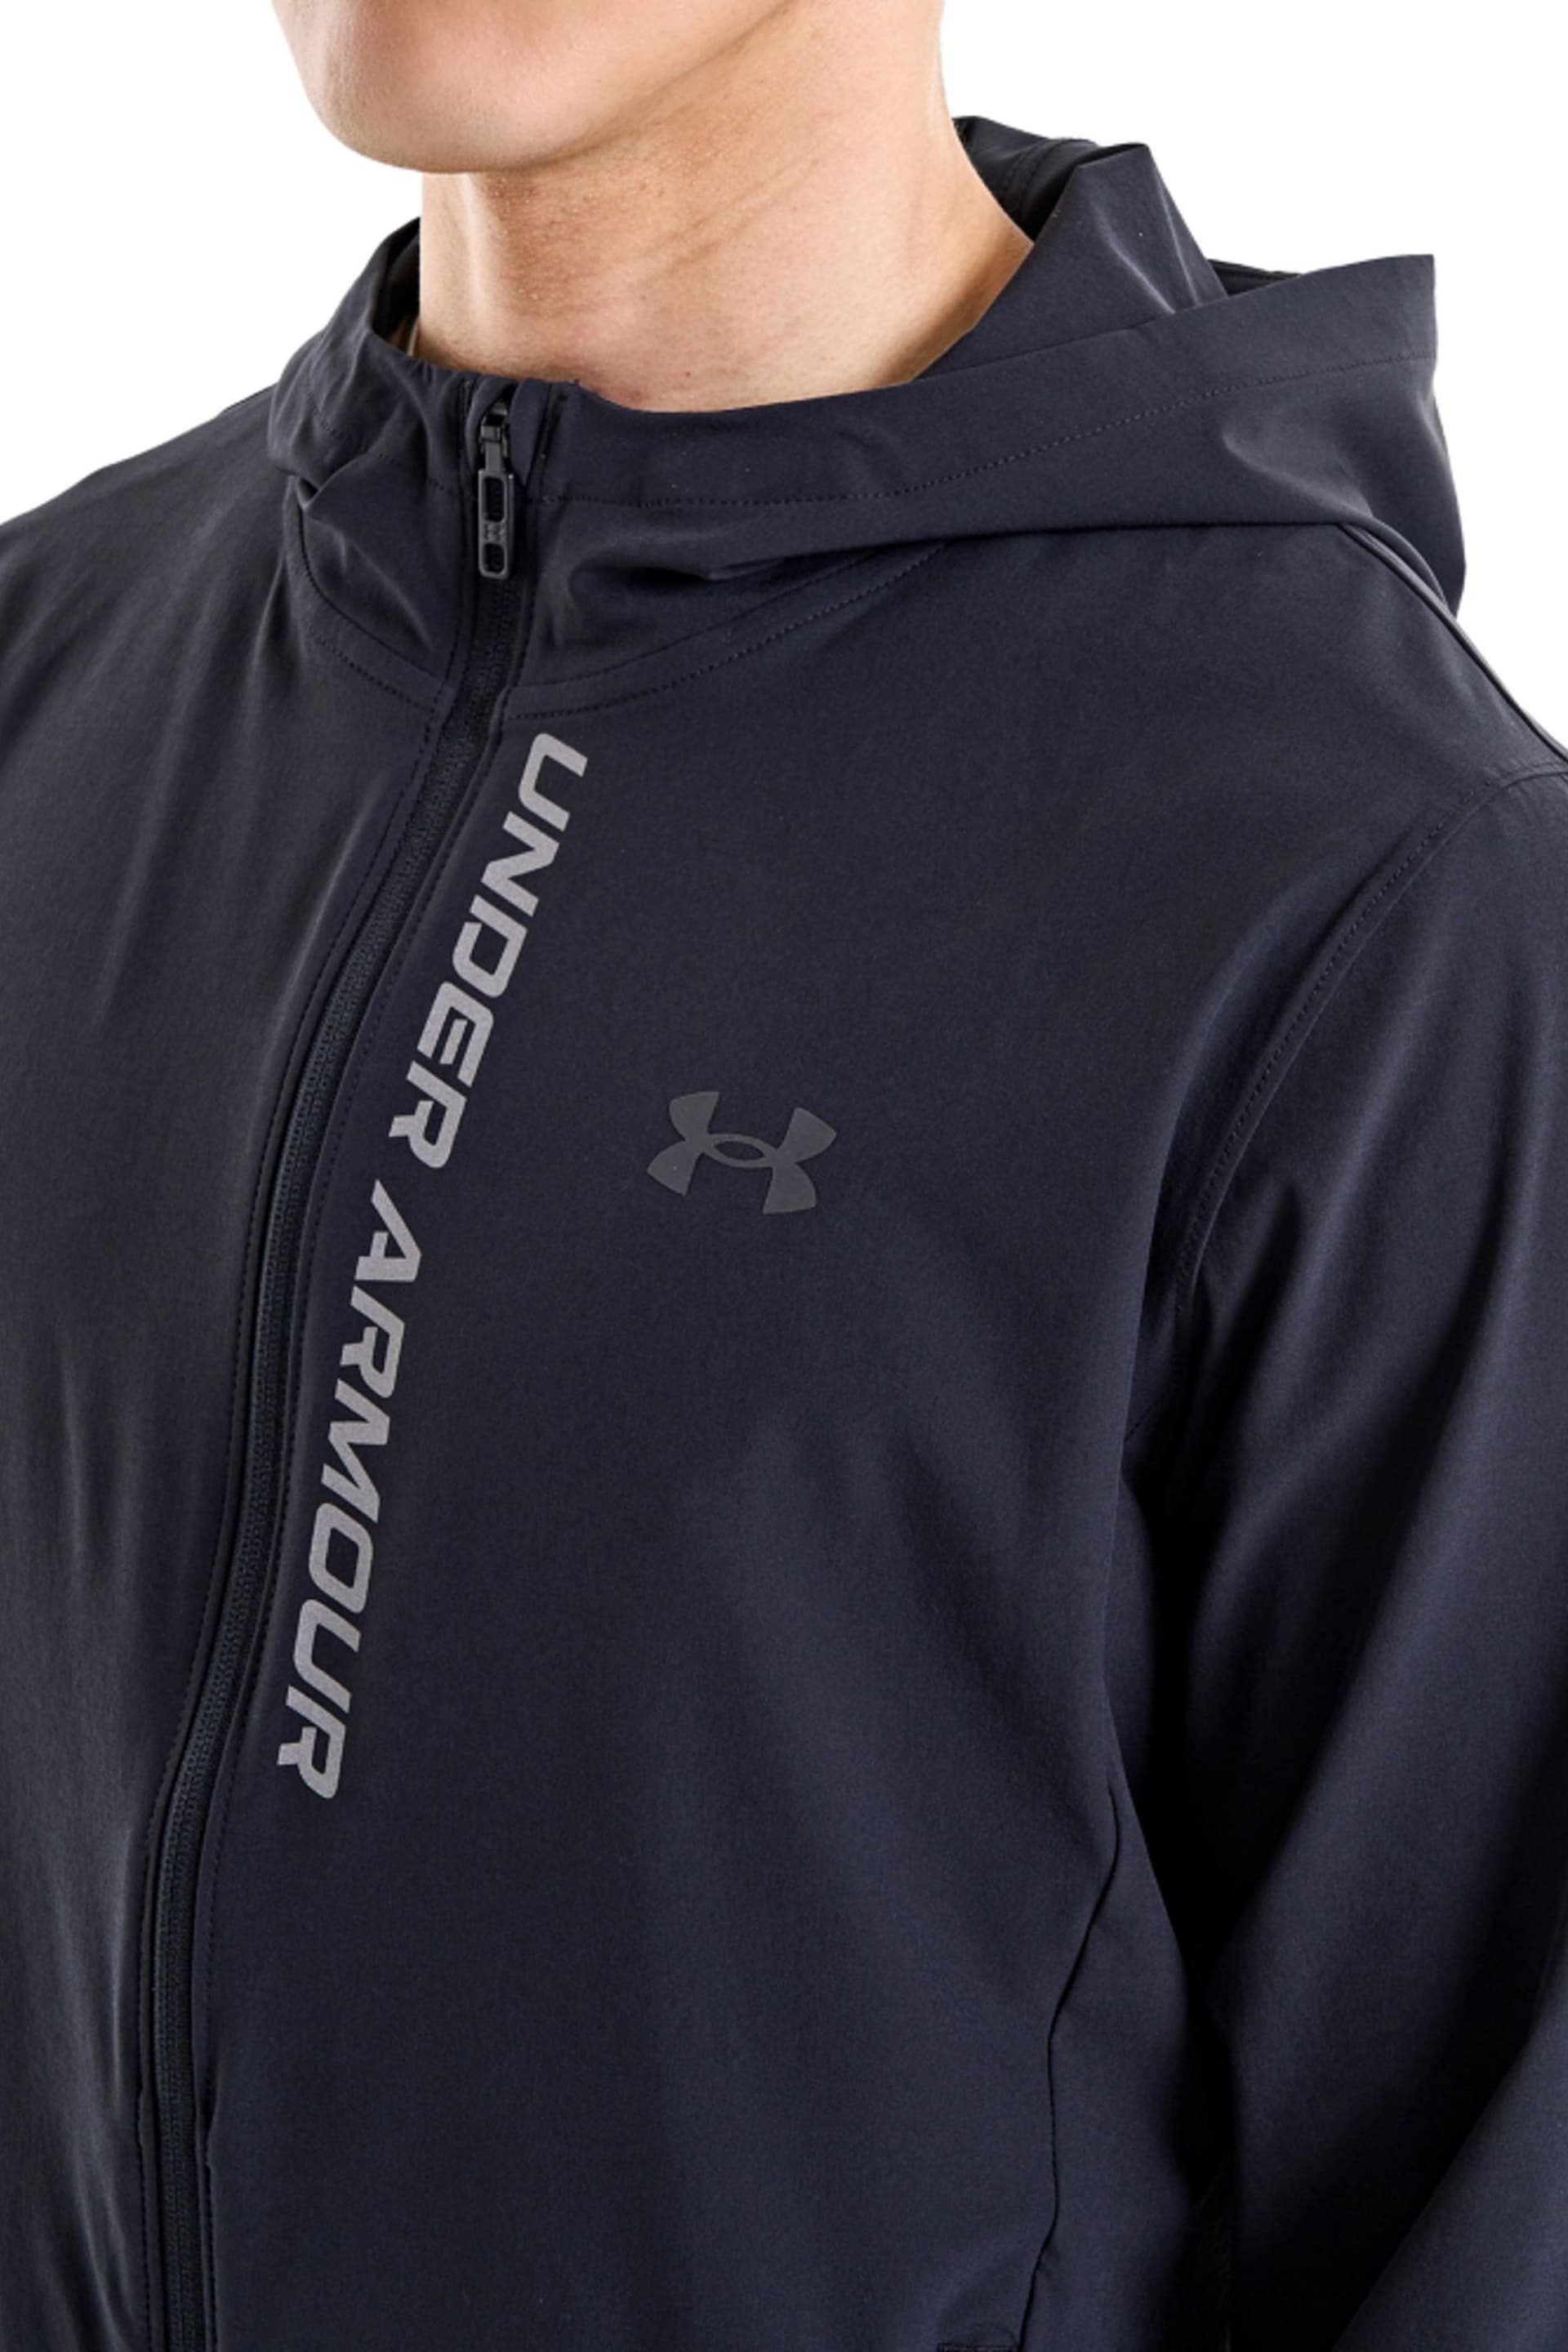 Under Armour Outrun The Storm Black Jacket - Image 7 of 19